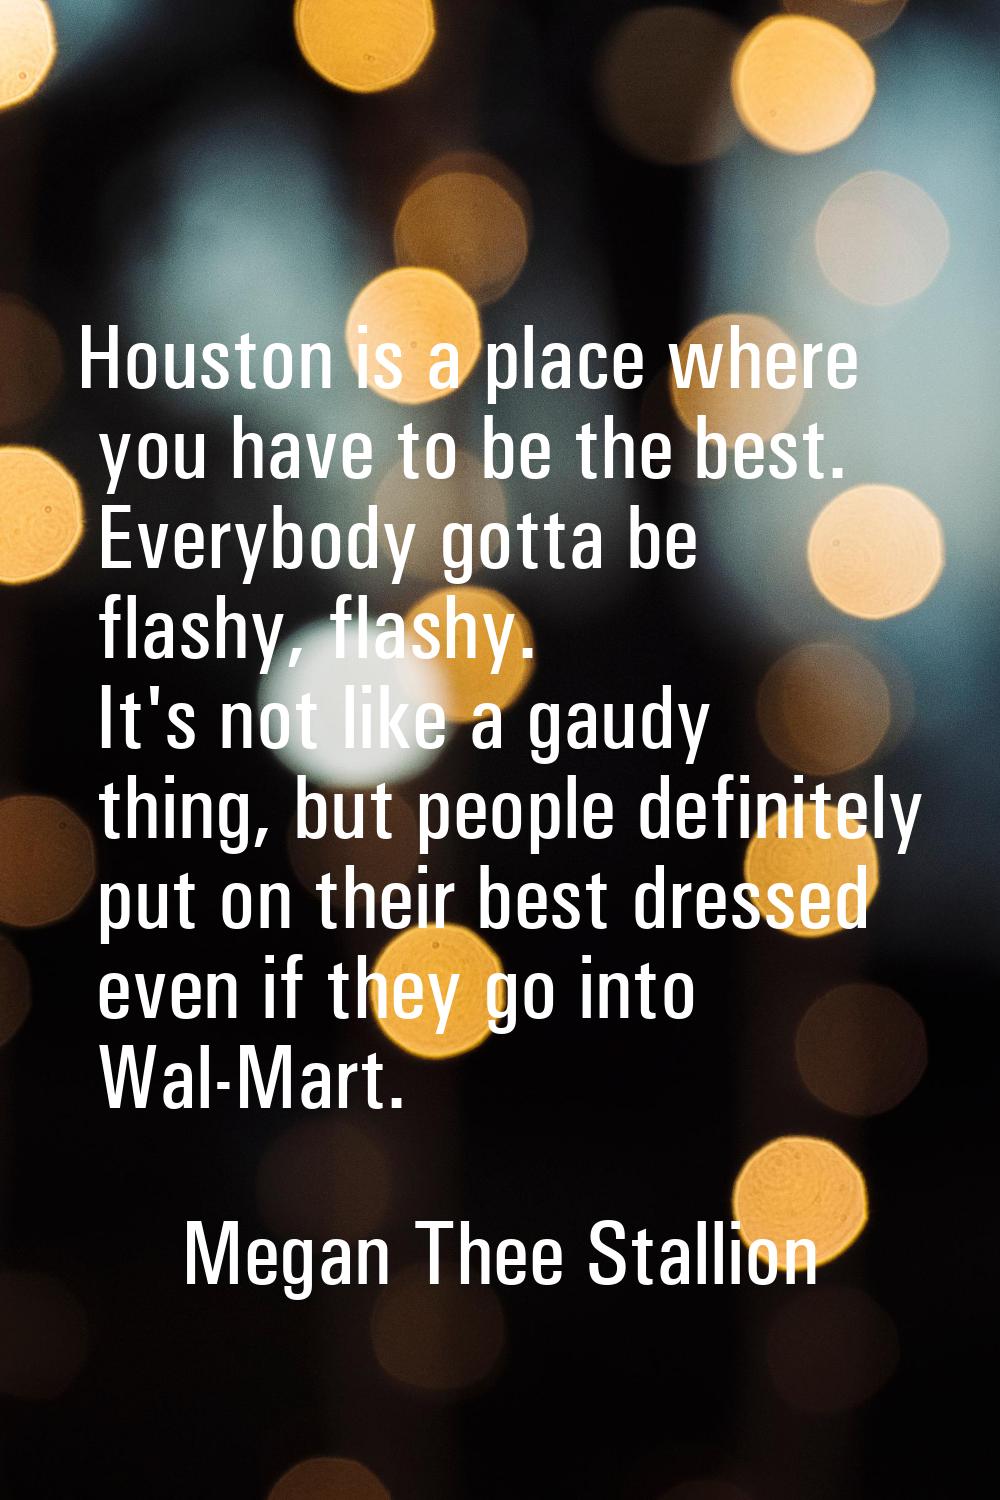 Houston is a place where you have to be the best. Everybody gotta be flashy, flashy. It's not like 